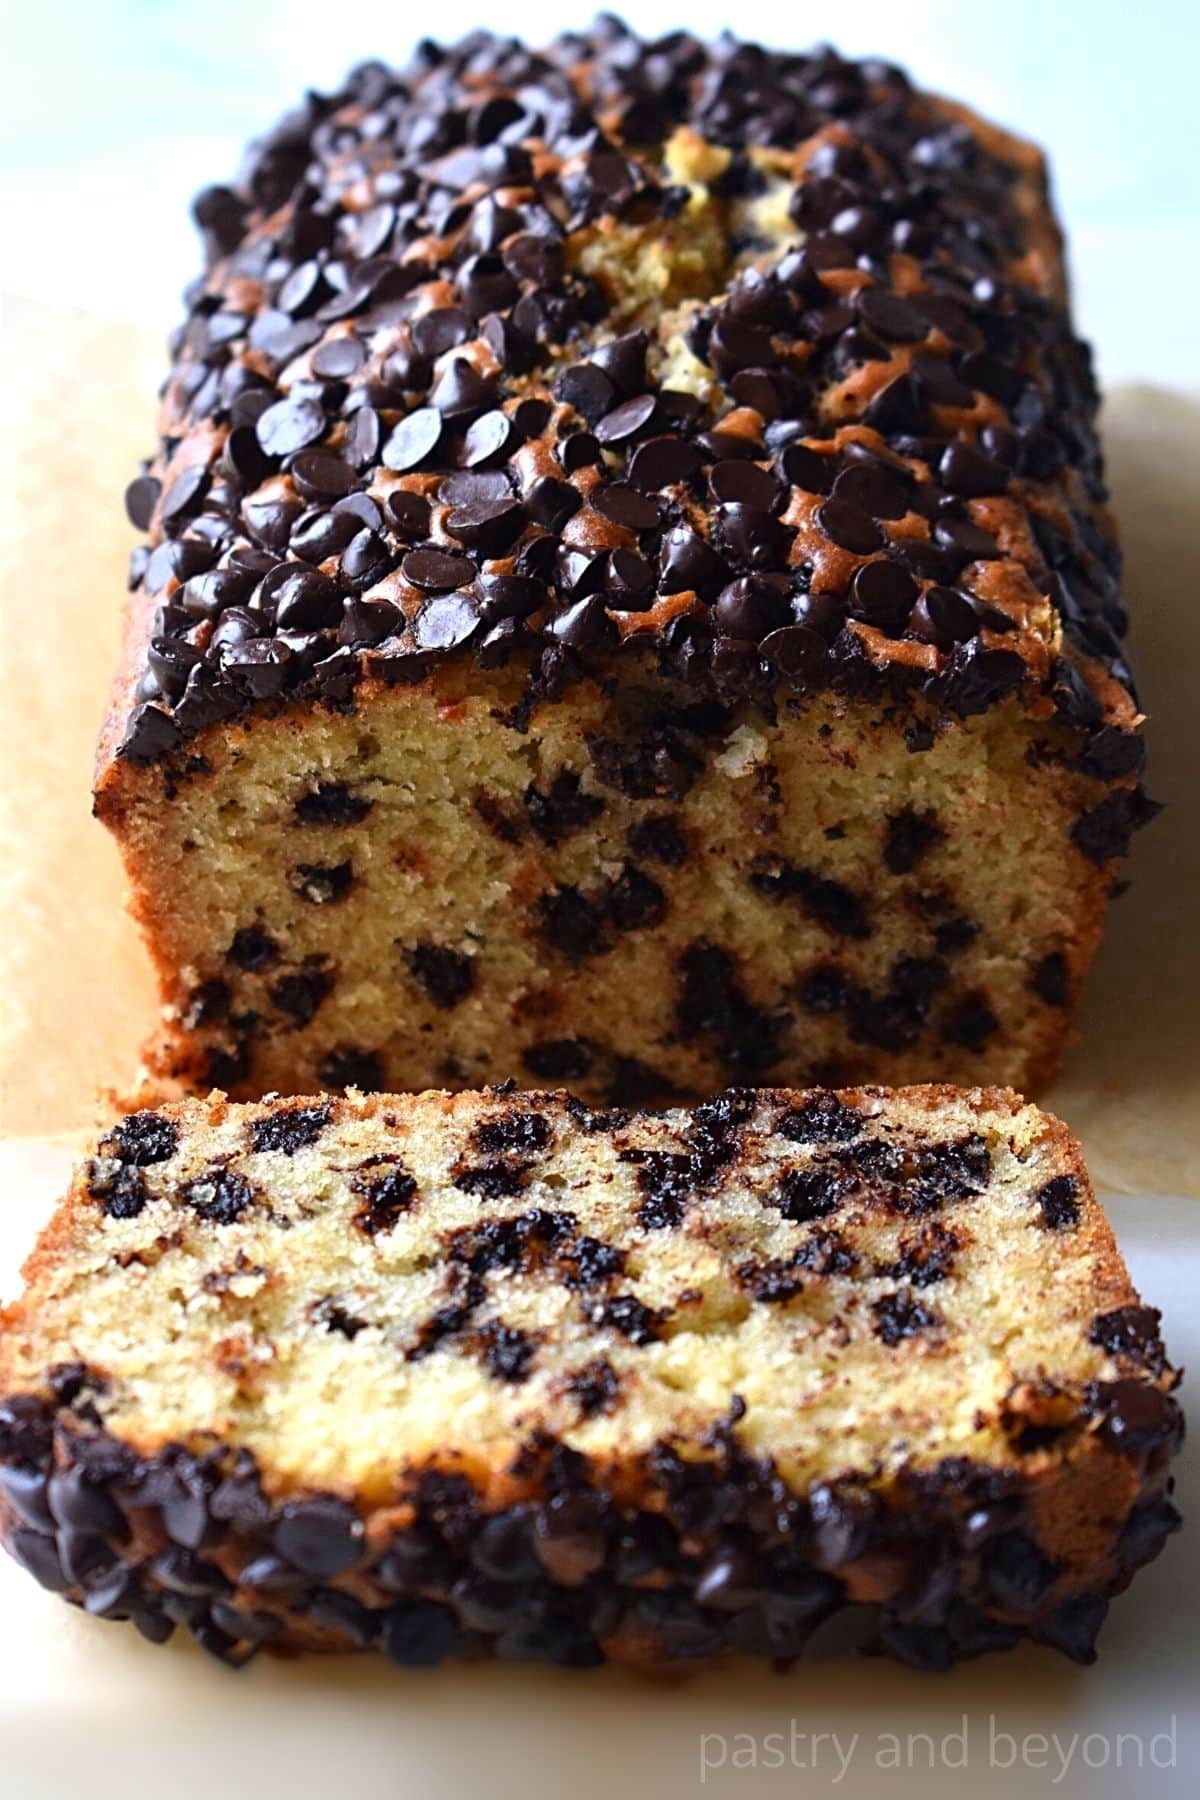 Chocolate chip loaf cake with a slice.